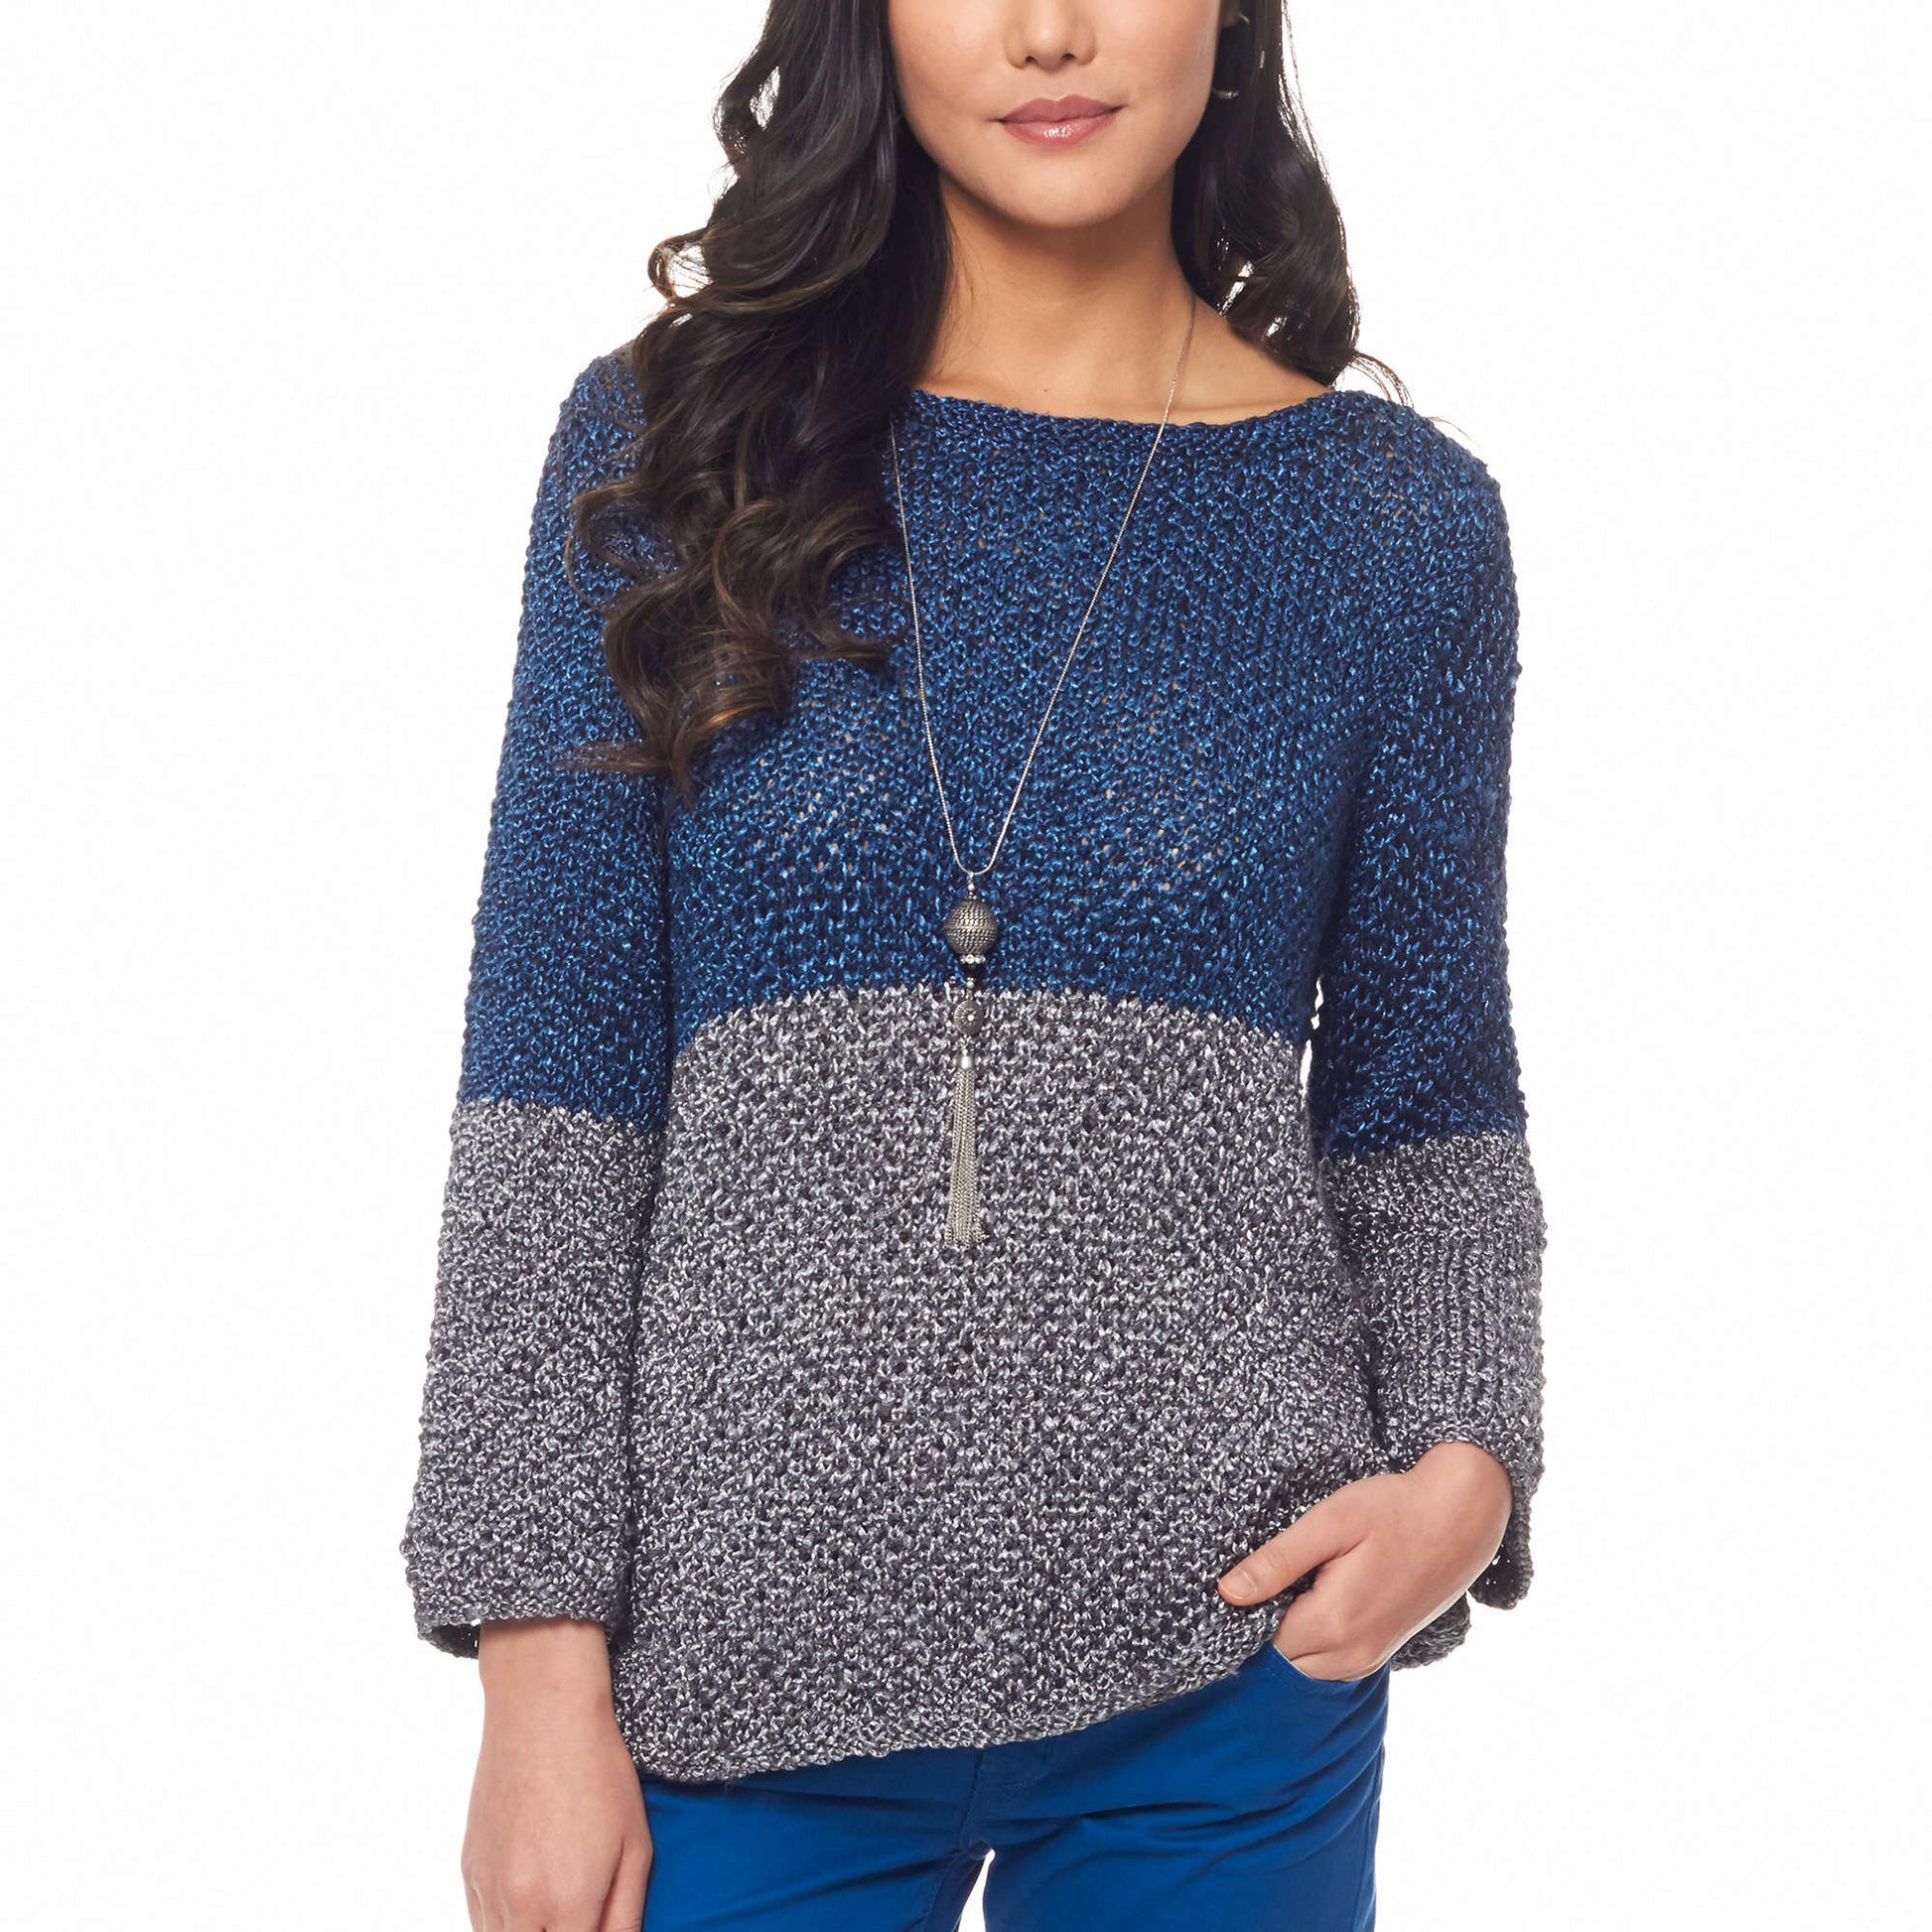 Free Patons Color Dipped Top Knit Pattern